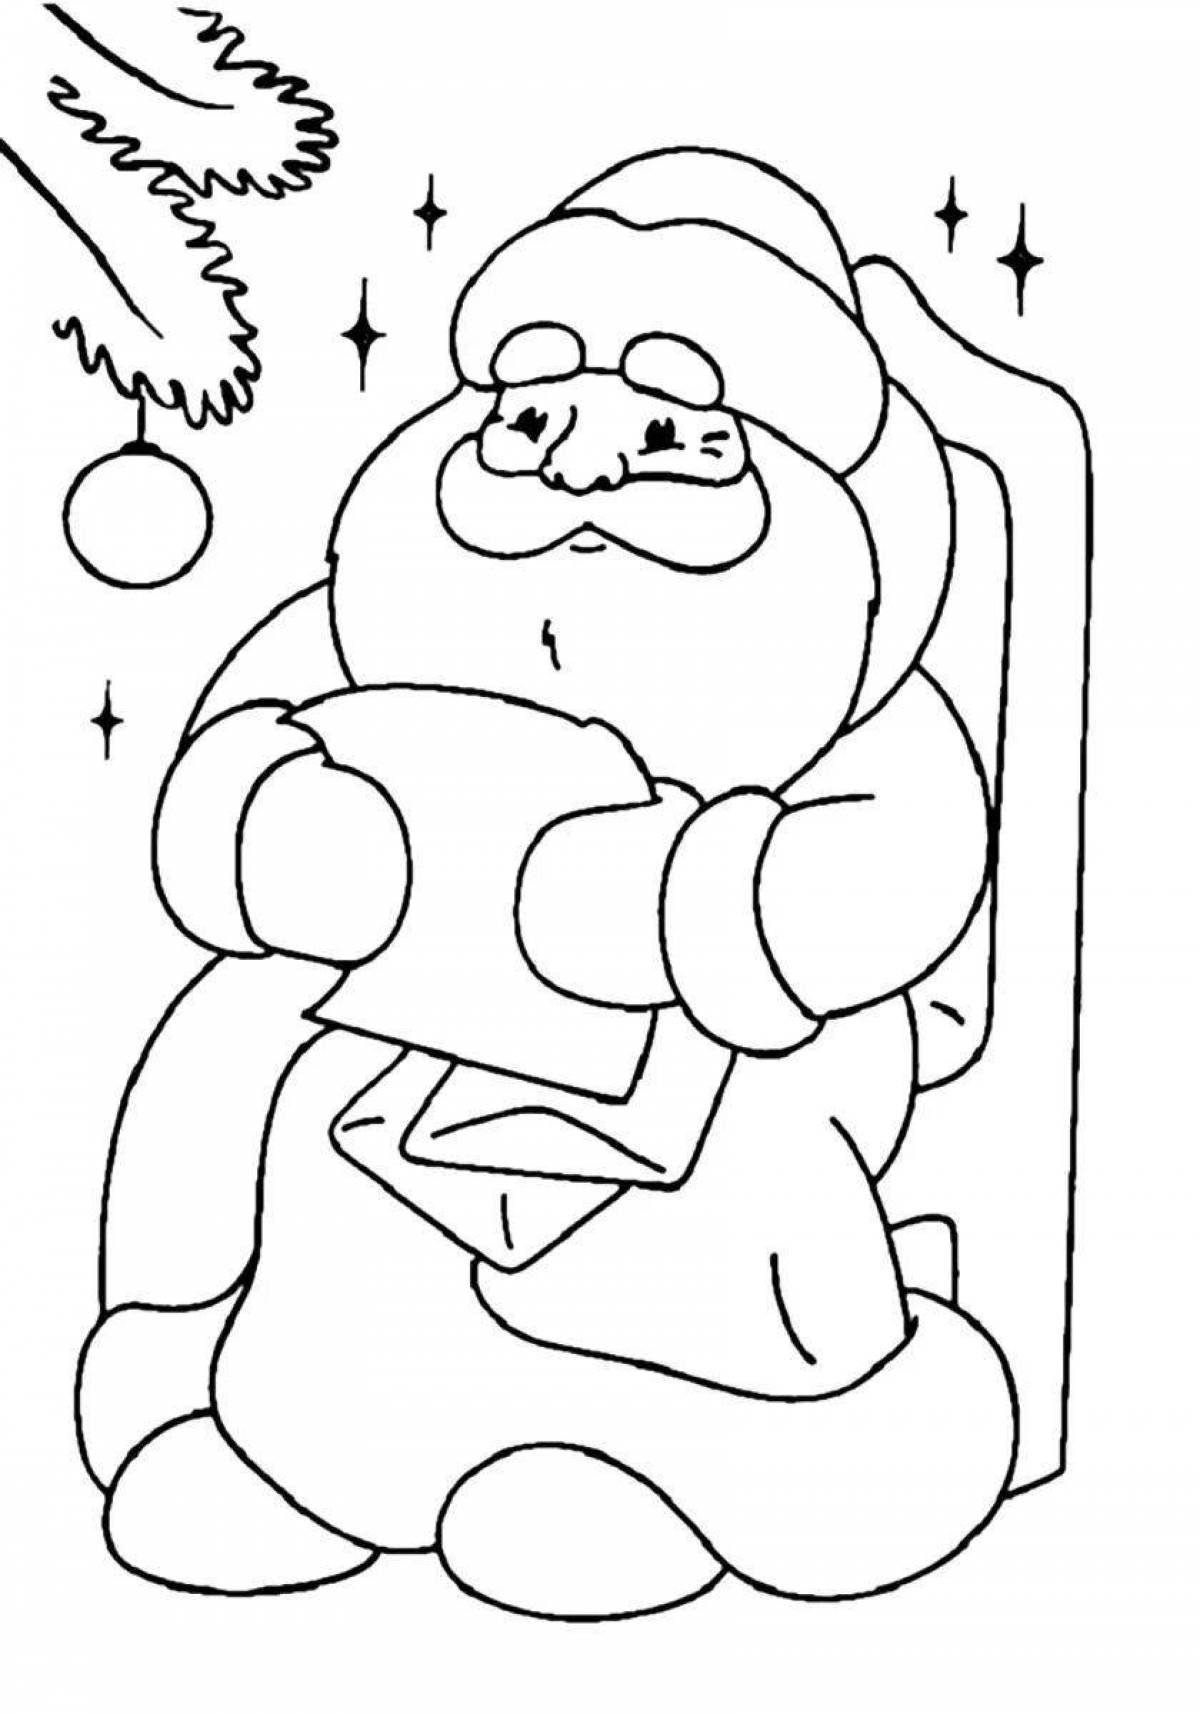 Adorable frost coloring book for kids